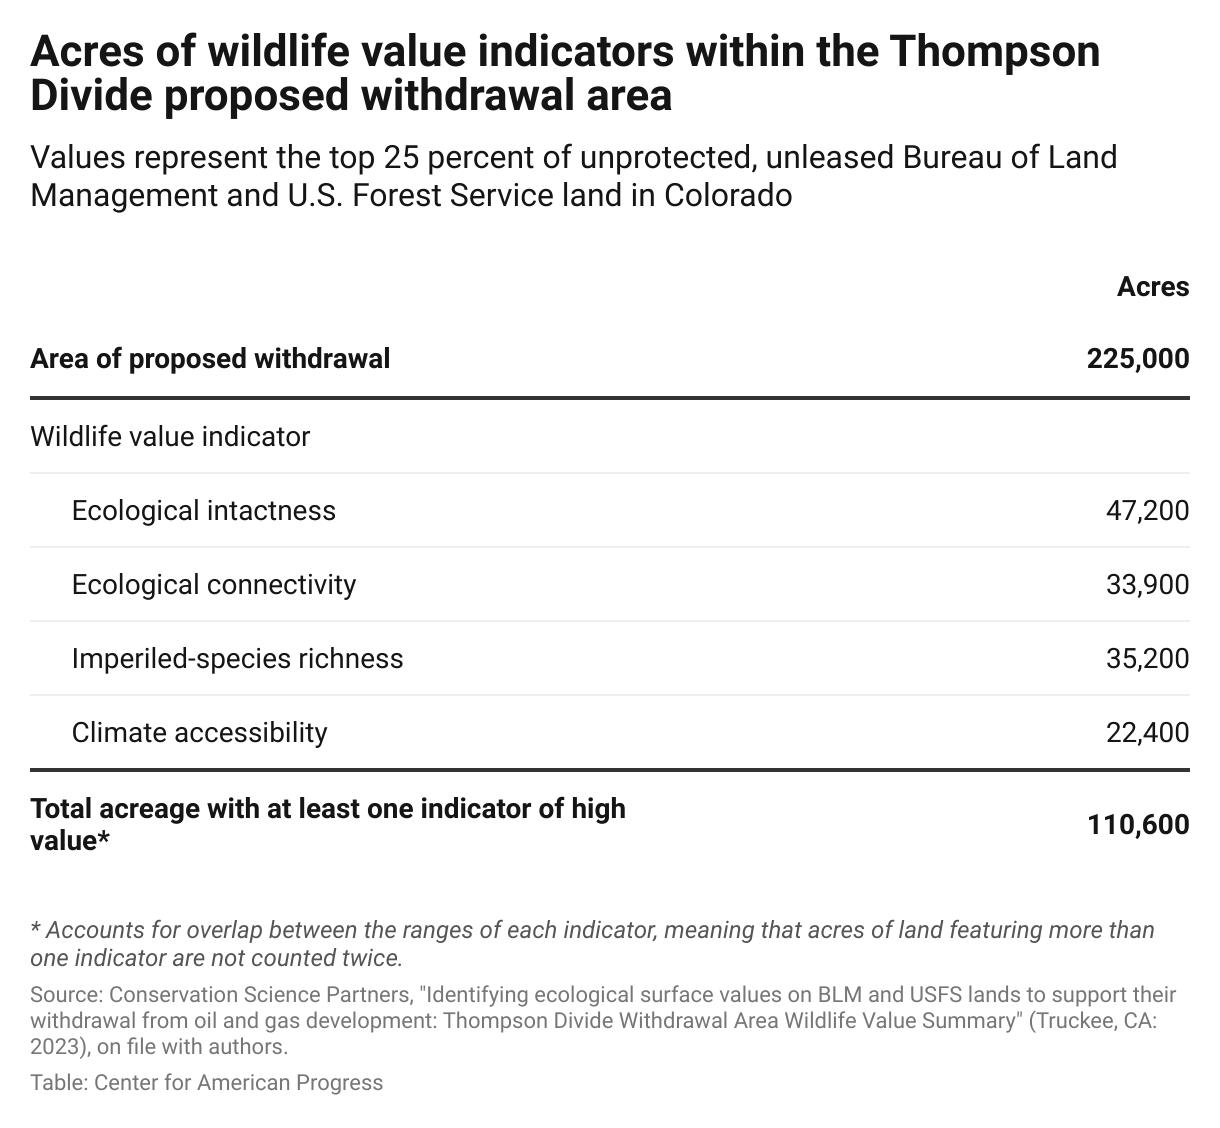 Table showing the acreages of each wildlife value indicator within the Thompson Divide withdrawal area.